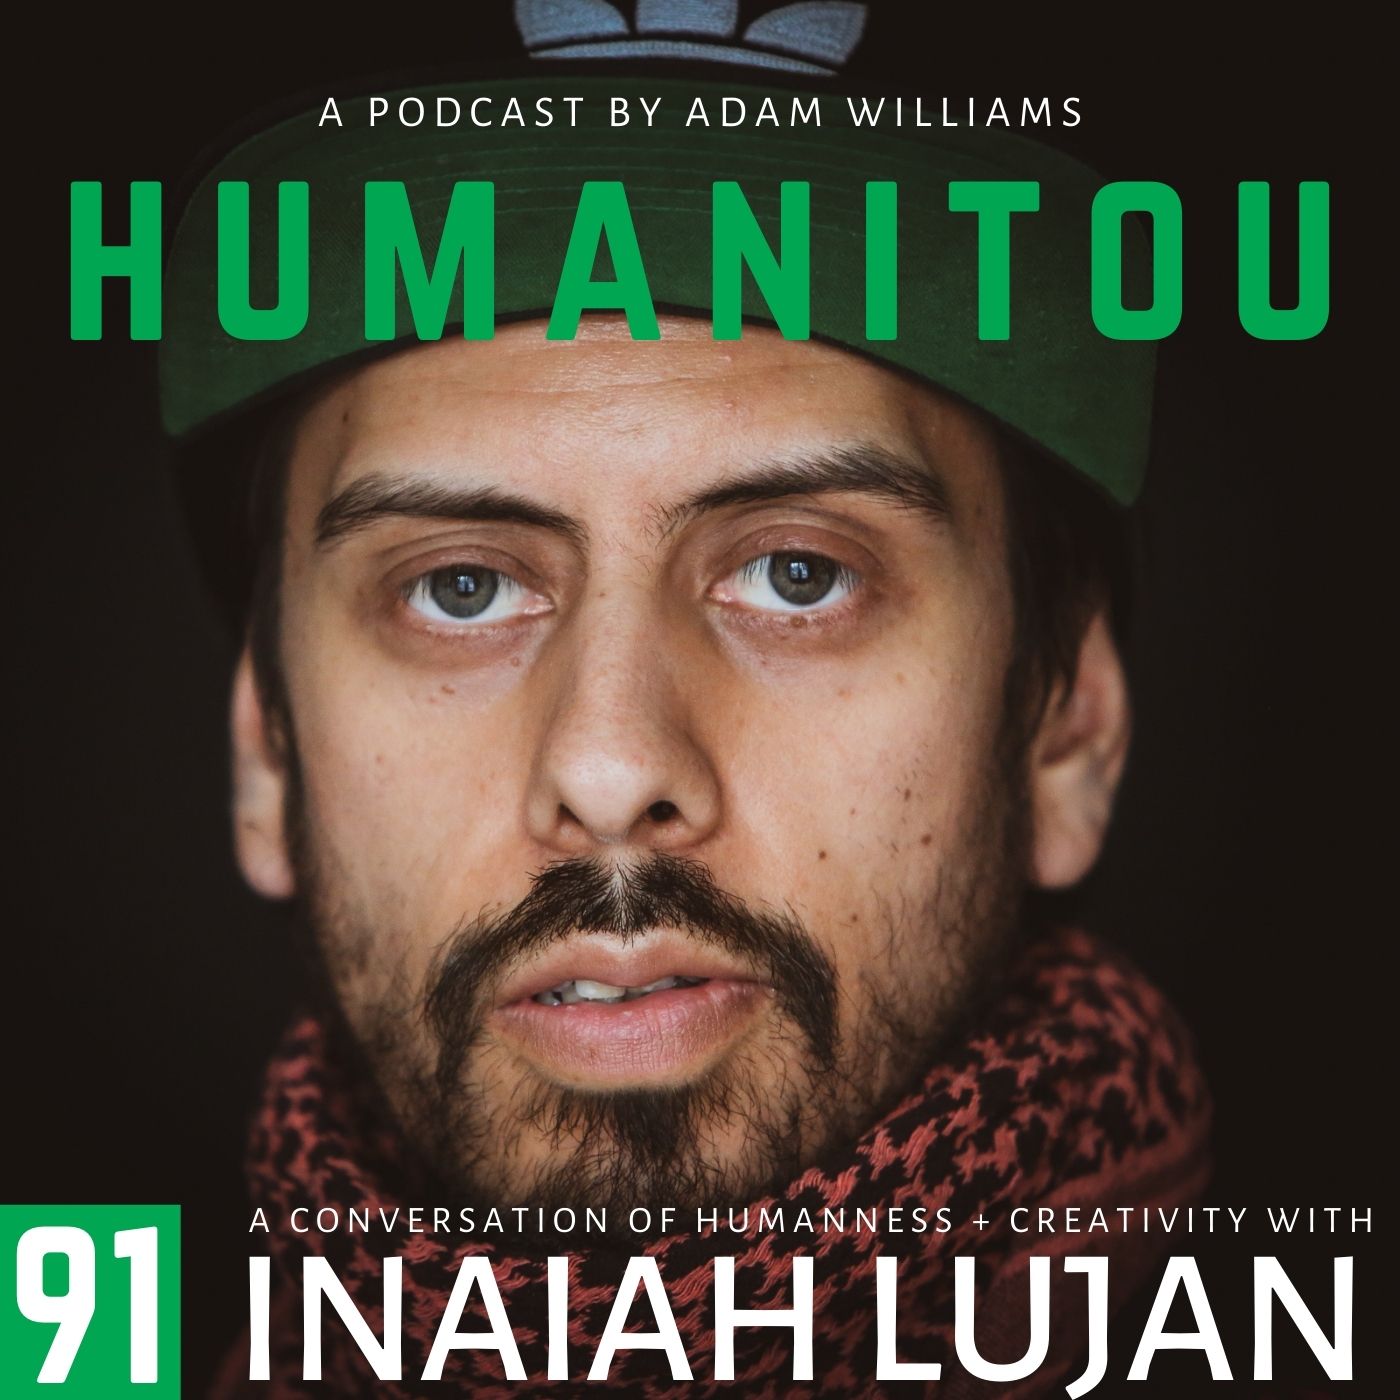 91: Inaiah Lujan, prolific creator, dispels the myth of being a 'Jack of all trades, master of none'